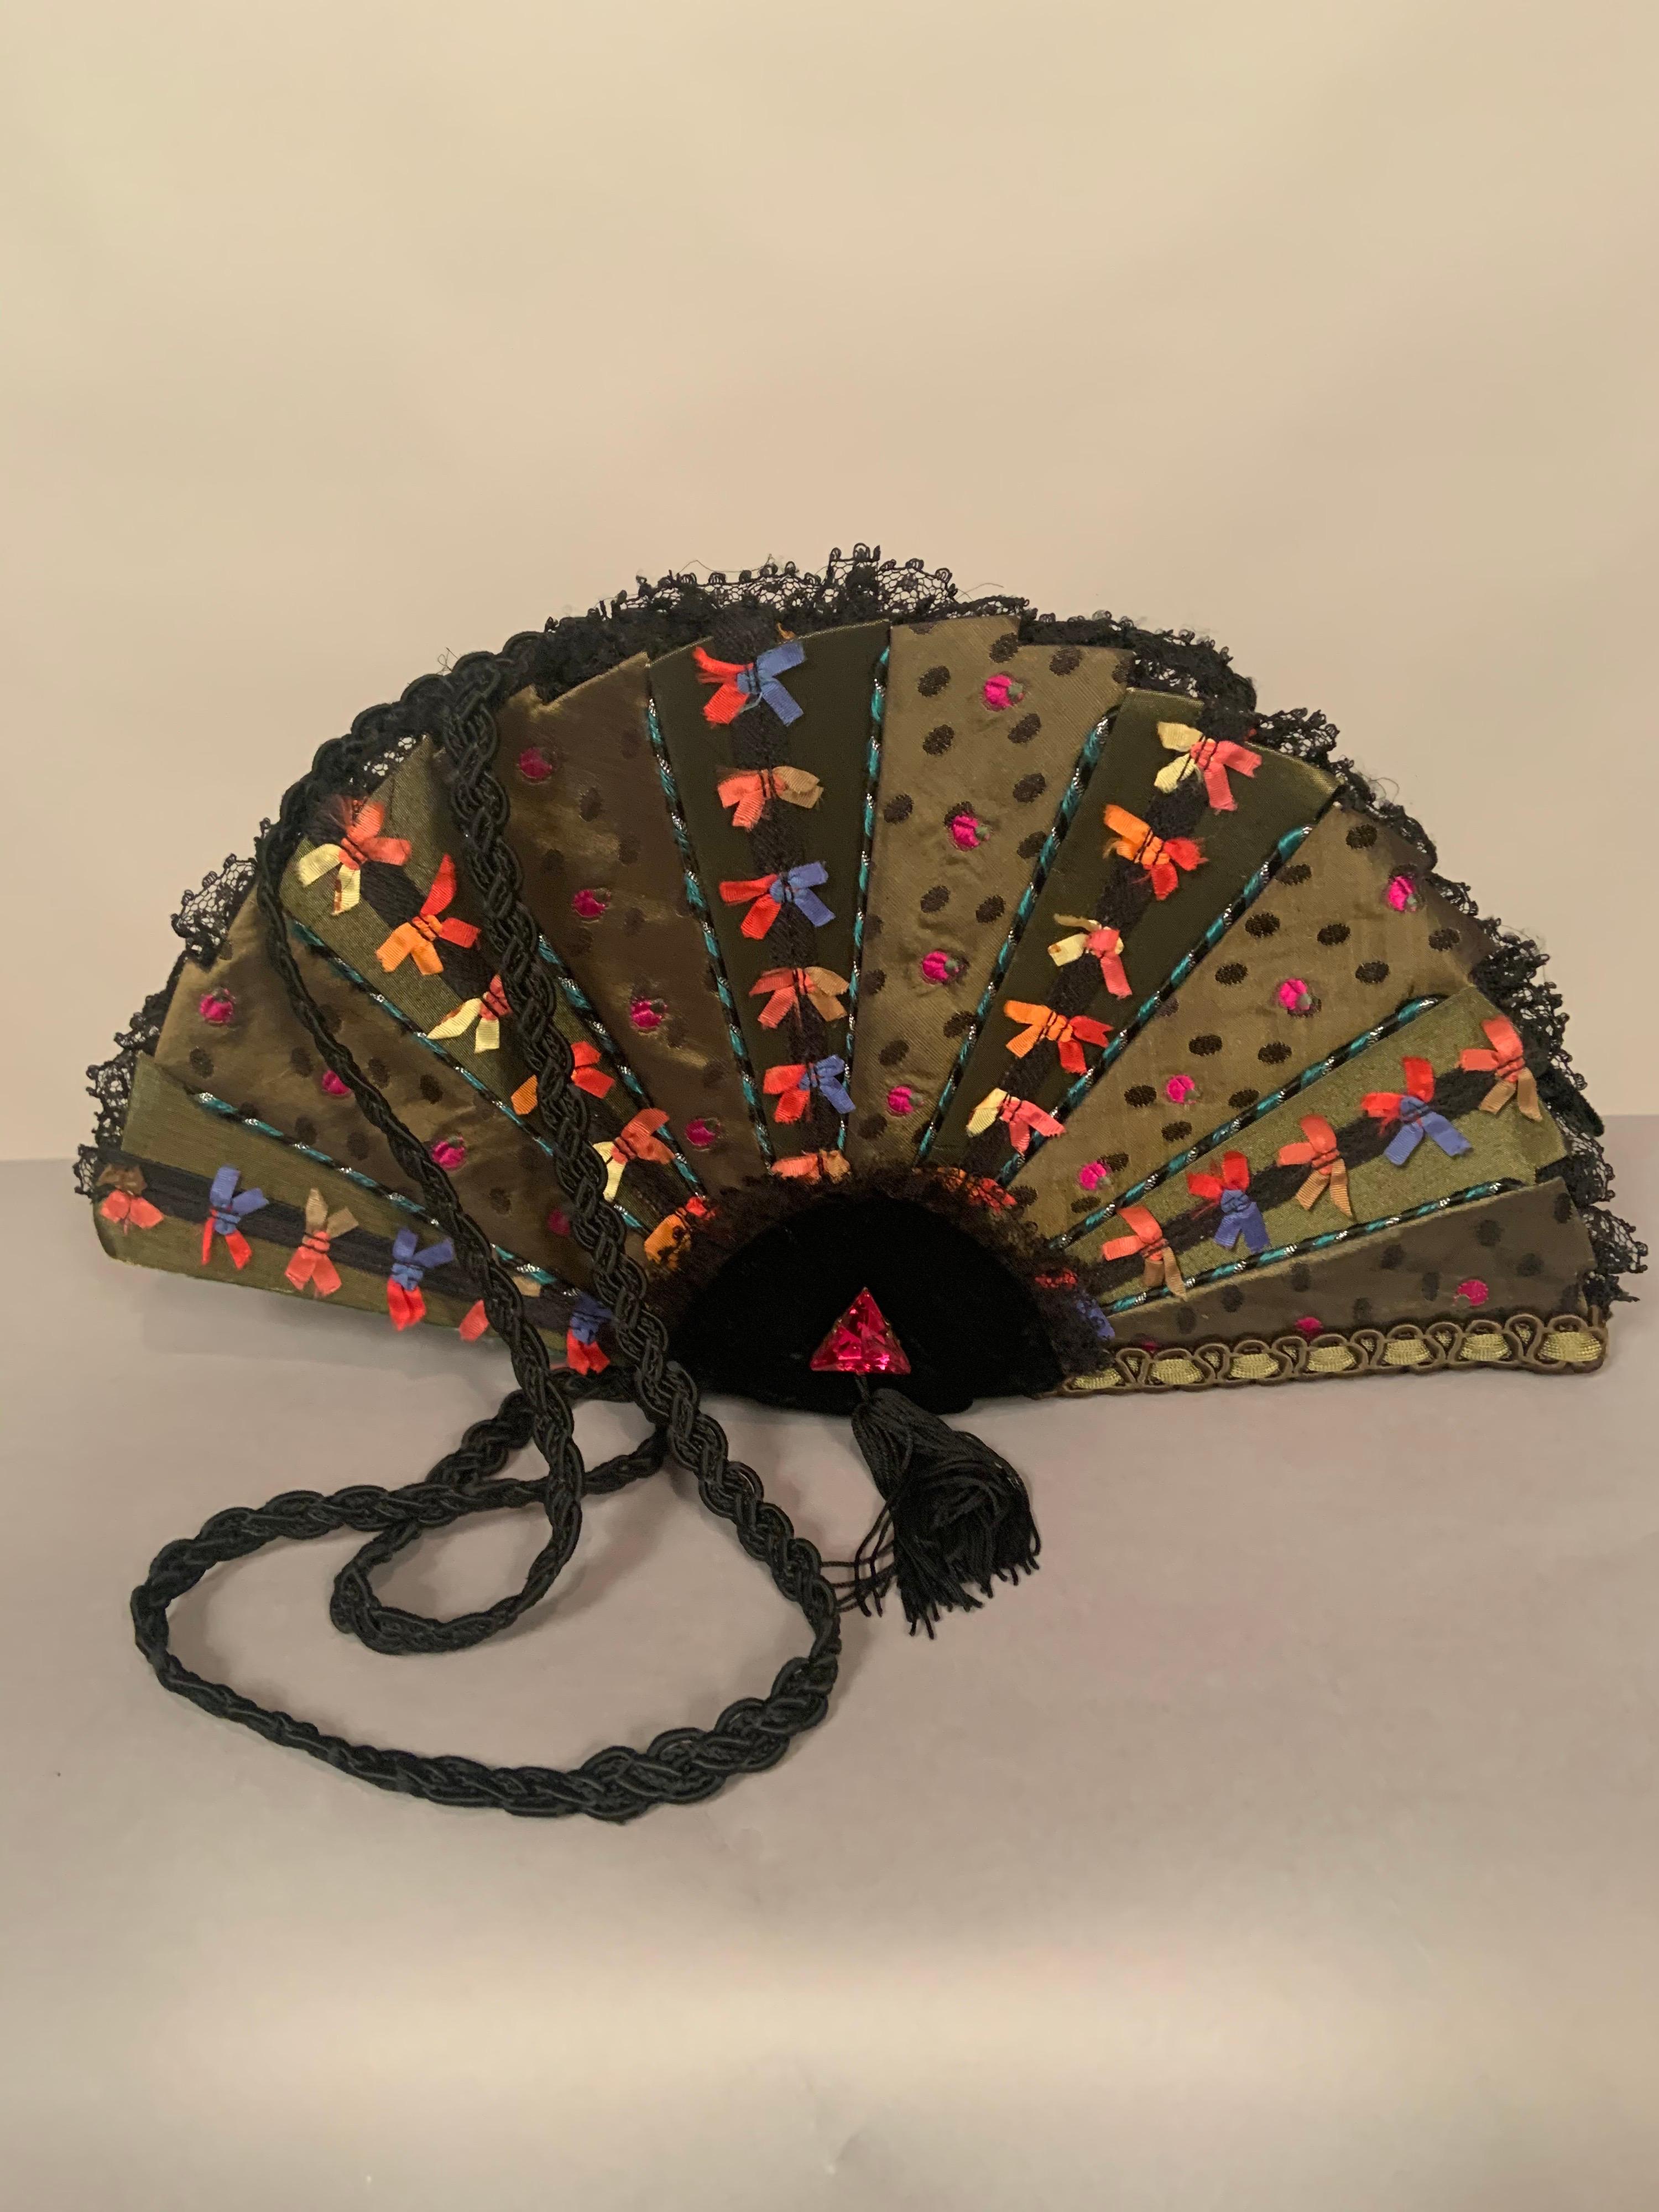 Helene Angeli, located in Nice, in the South of France, designs fanciful handbags in the shape of familiar objects. This bag representing a fan is covered with two different olive green silks, one solid fabric adorned with multi color bows, the